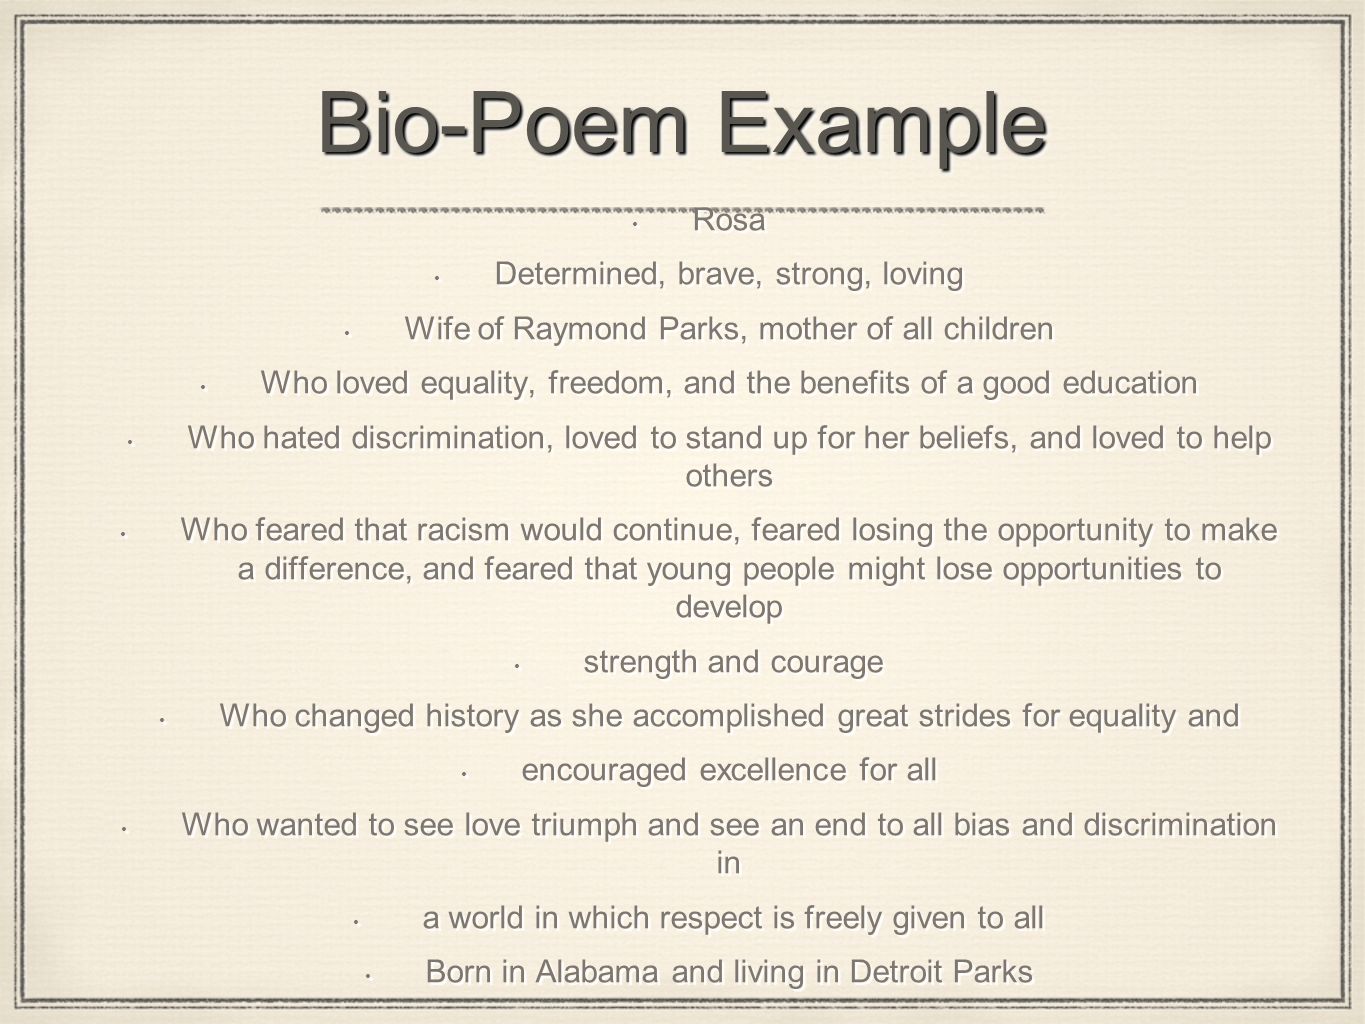 Bio Poem Miguel A. Arce Ramos English 29th. - ppt video online download